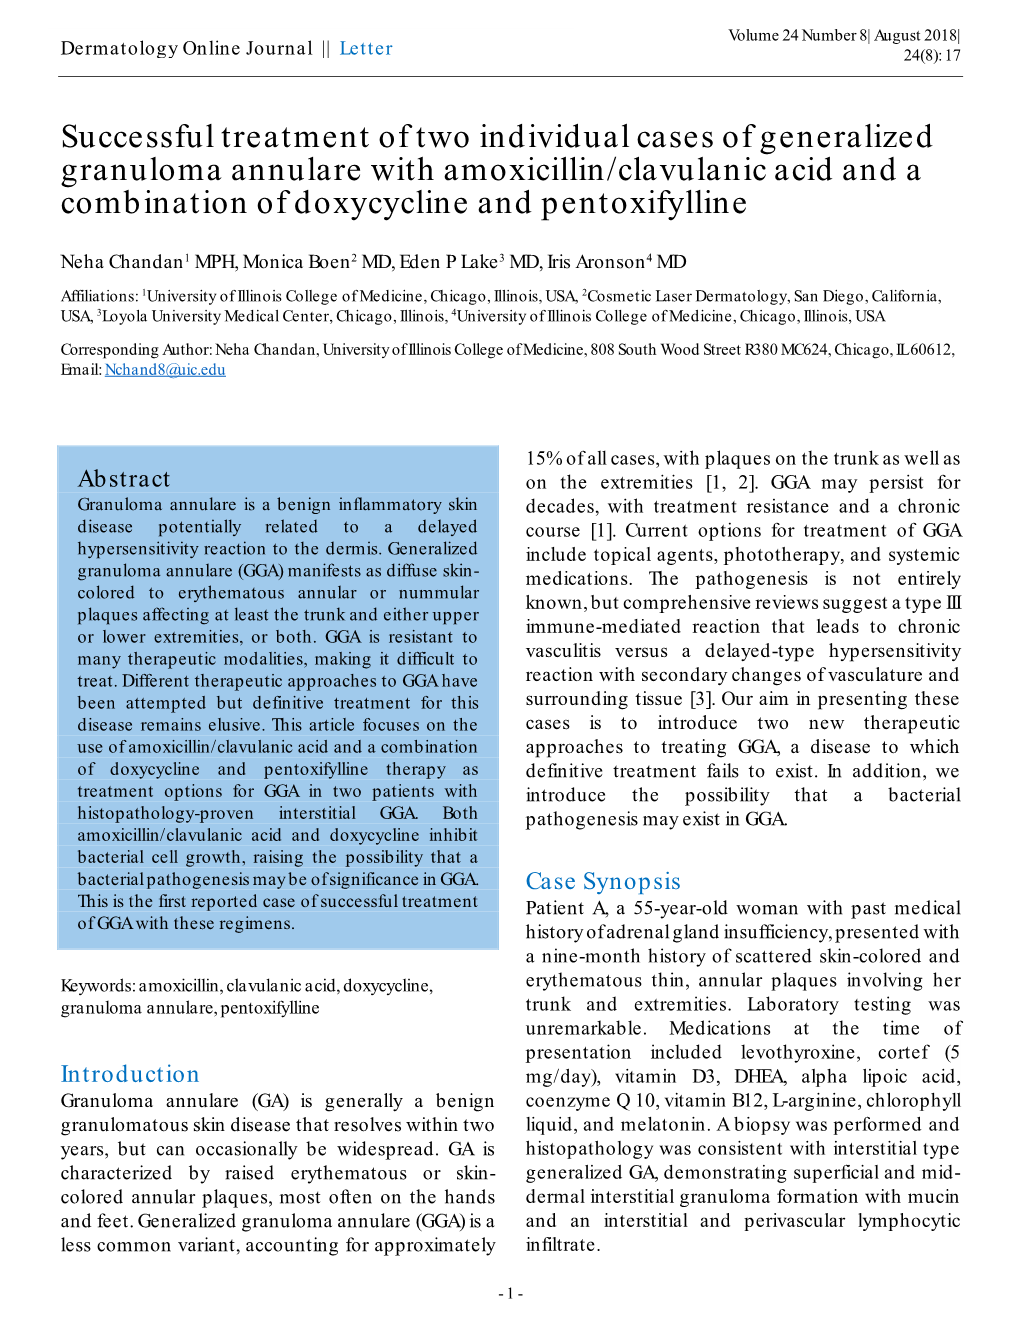 Successful Treatment of Two Individual Cases of Generalized Granuloma Annulare with Amoxicillin/Clavulanic Acid and a Combination of Doxycycline and Pentoxifylline